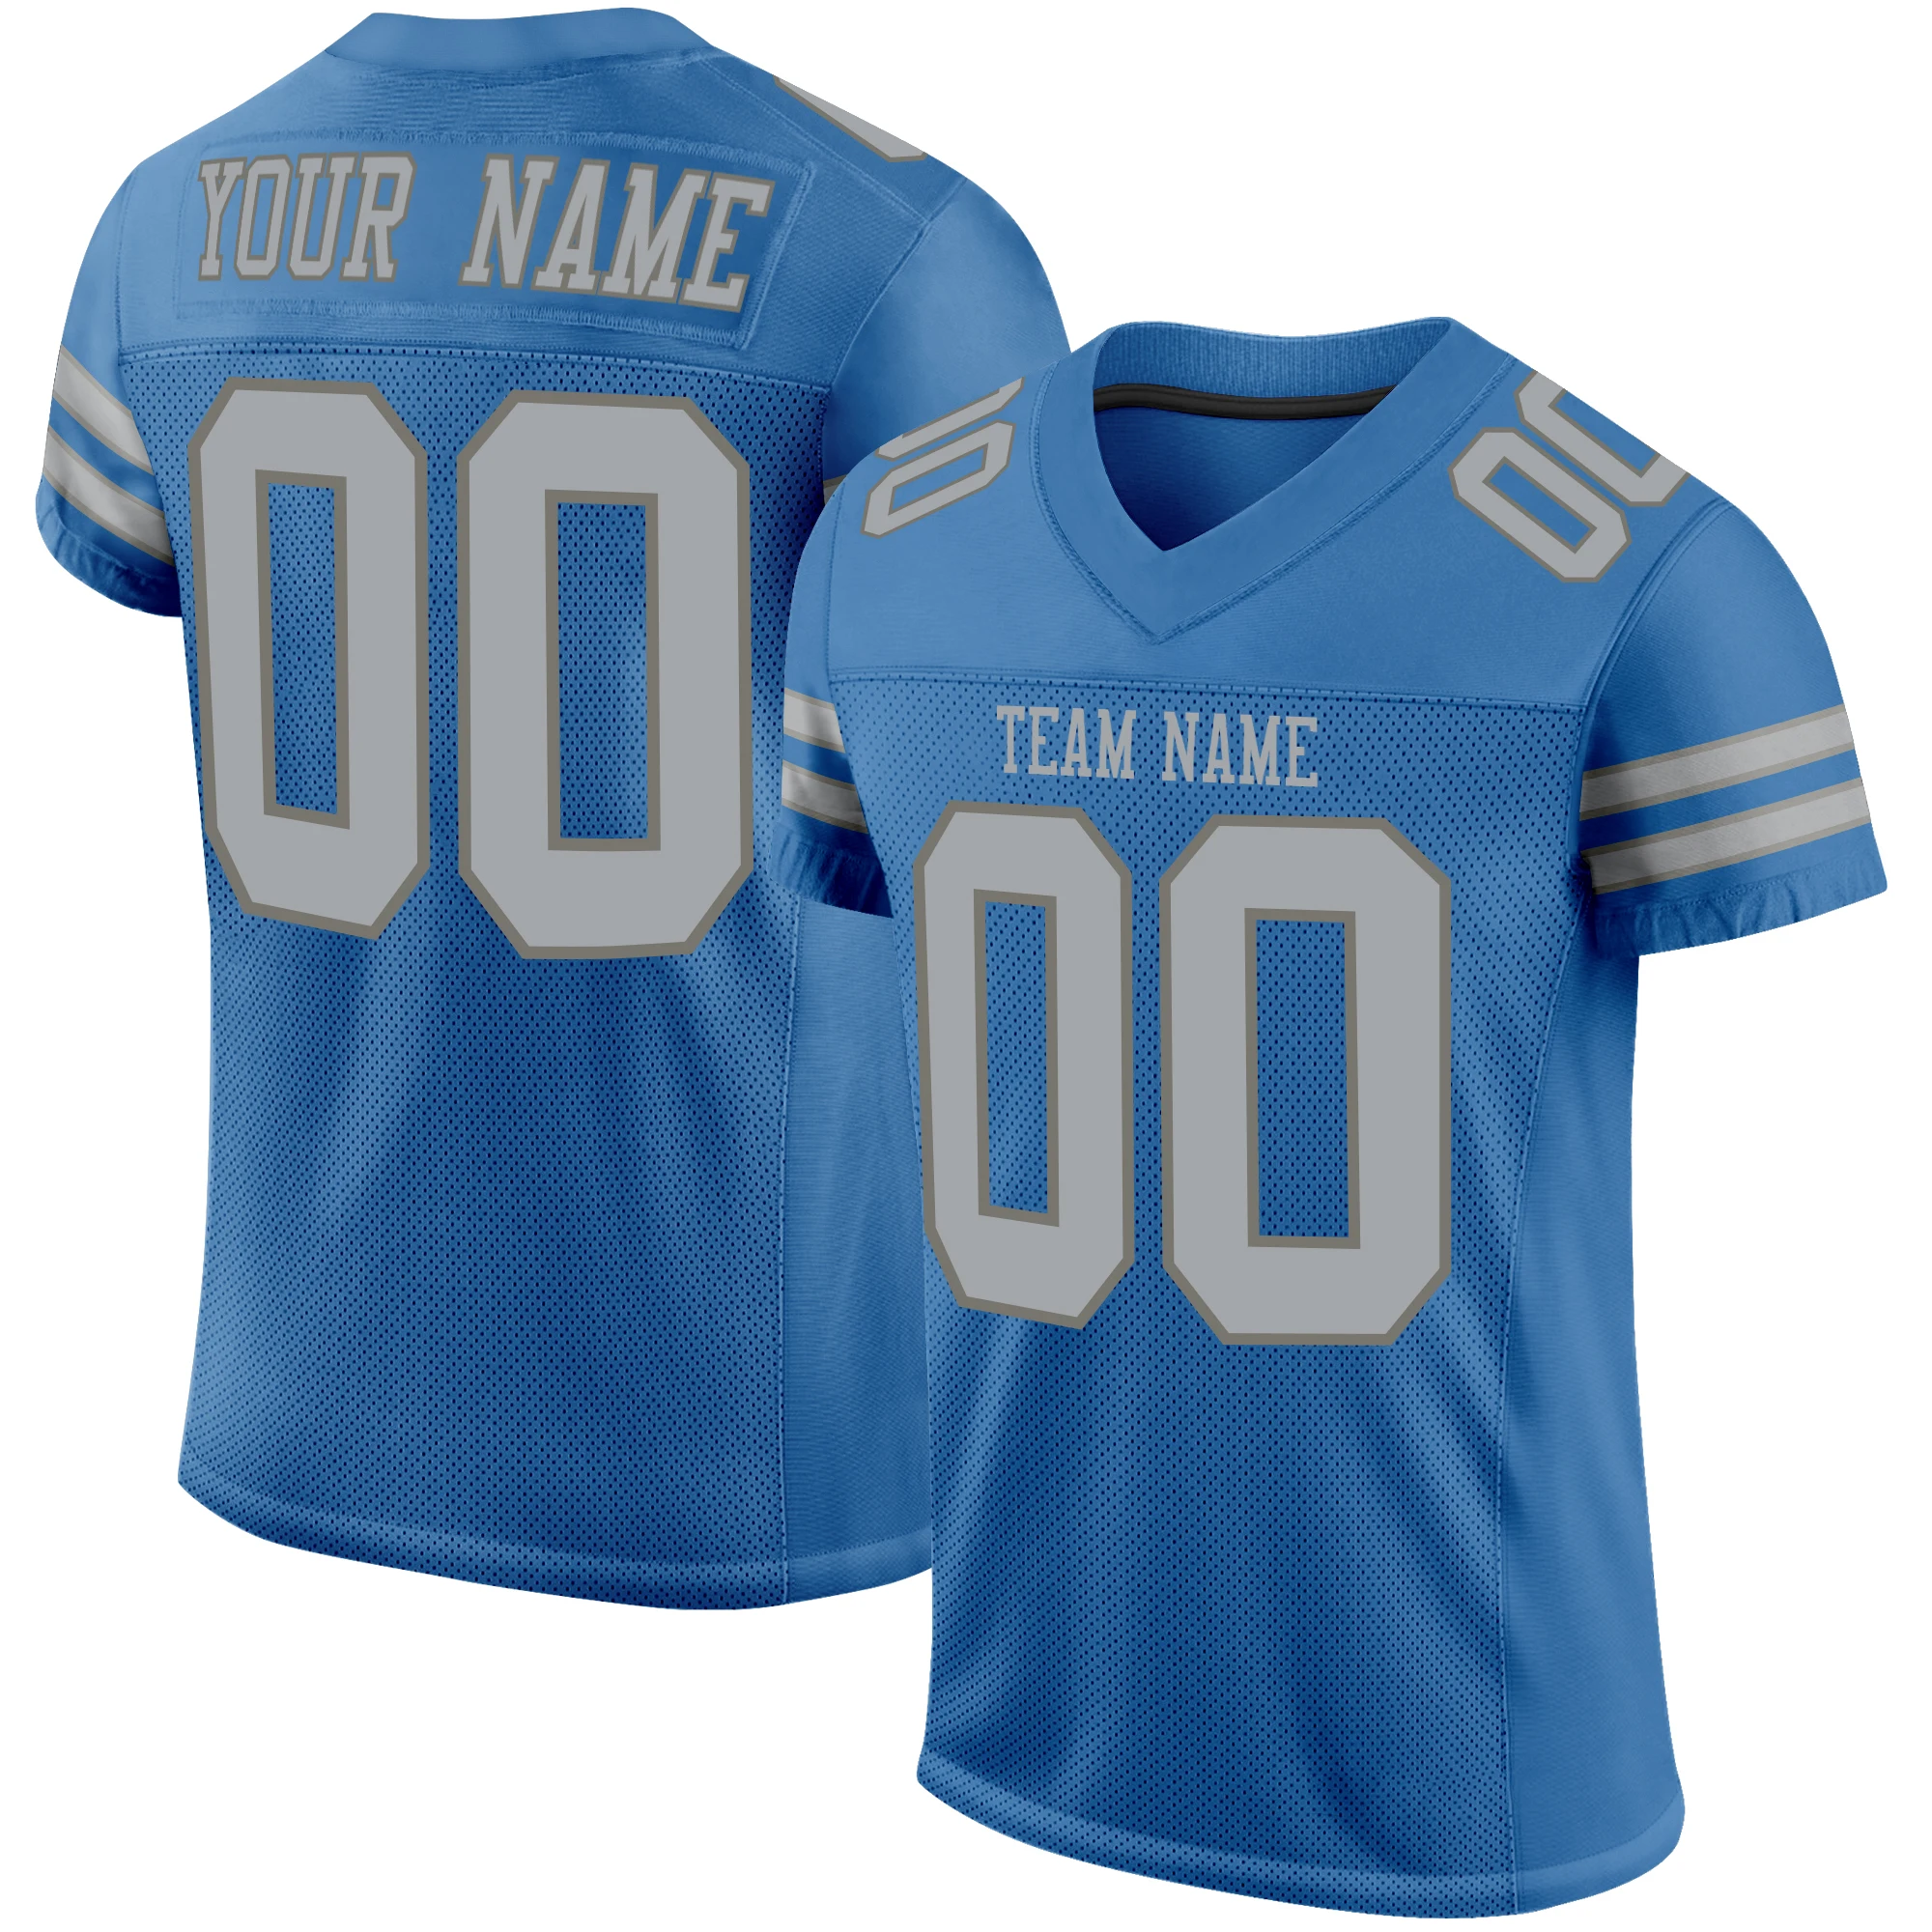 NFL Detroit Lions Jersey Kit Custom Lettering ANY YEAR Name Number